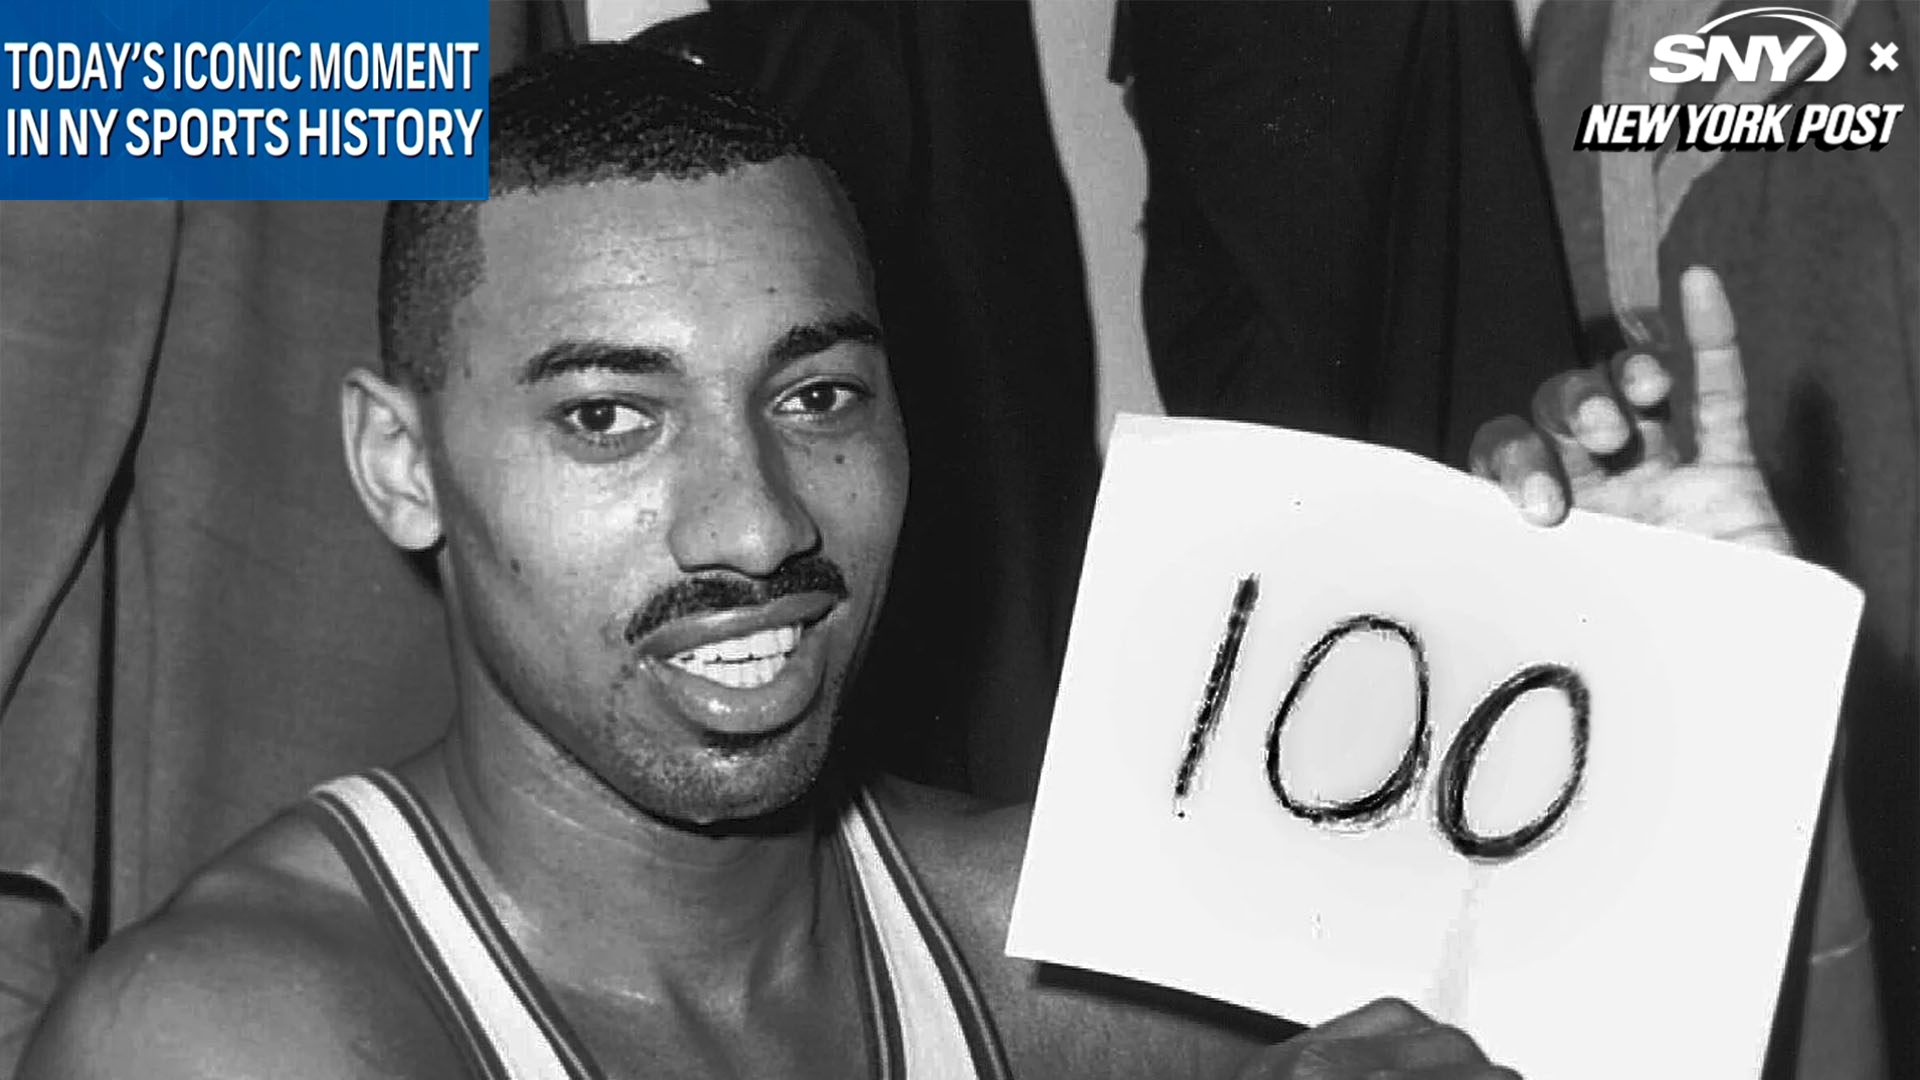 Today’s Iconic Moment in New York Sports: Wilt Chamberlain scores 100 points against the Knicks